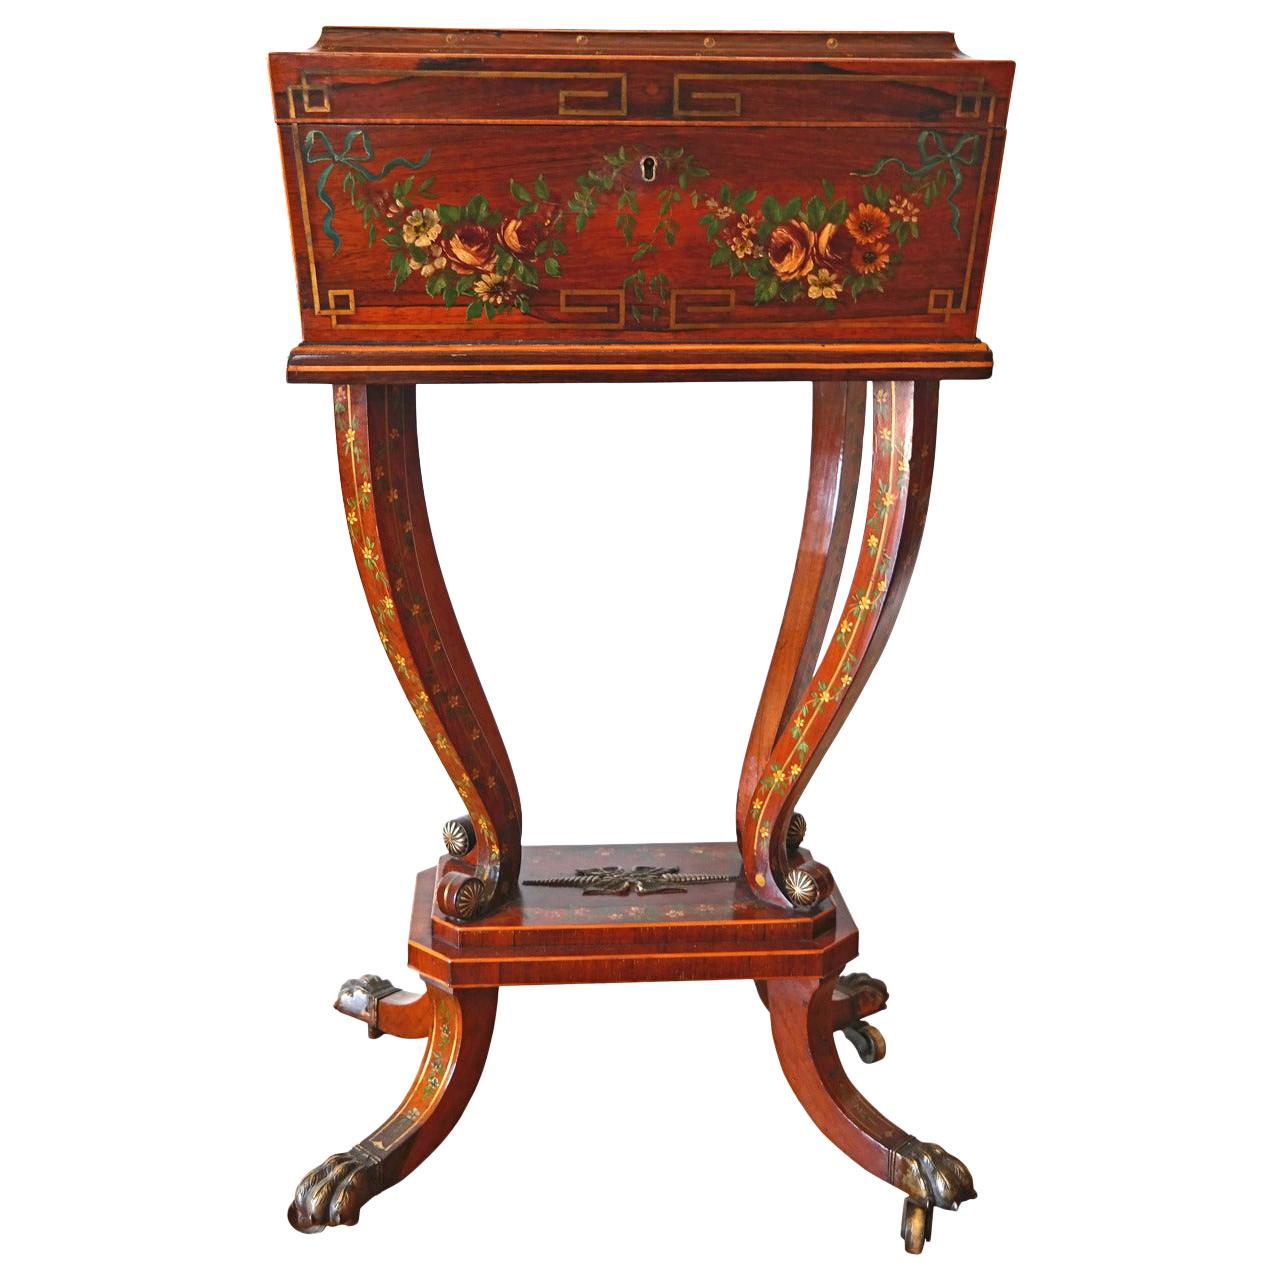 Early 19th Century English Regency Painted Rosewood Workbox, Circa 1790